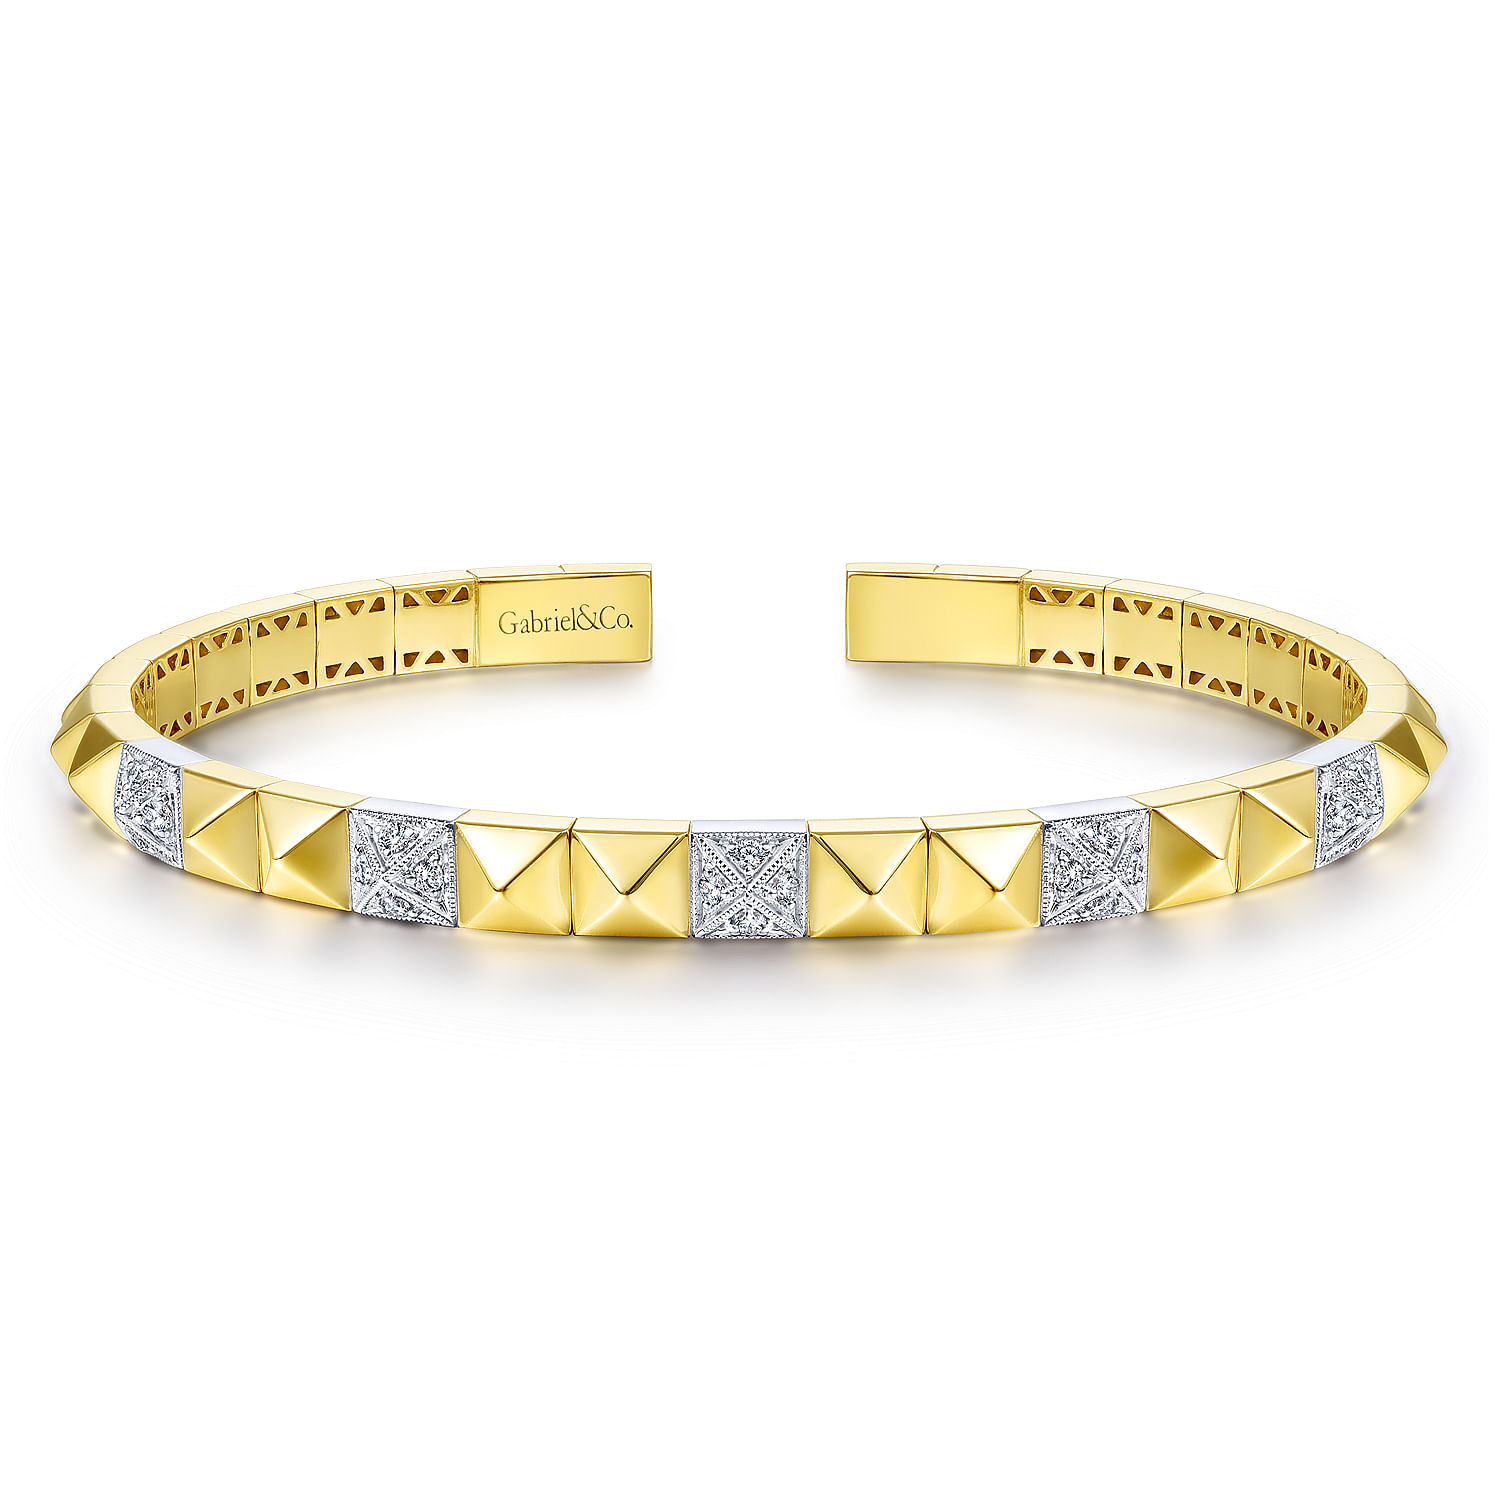 14K Yellow and White Gold Pyramid Bangle with Pavé Diamond Stations